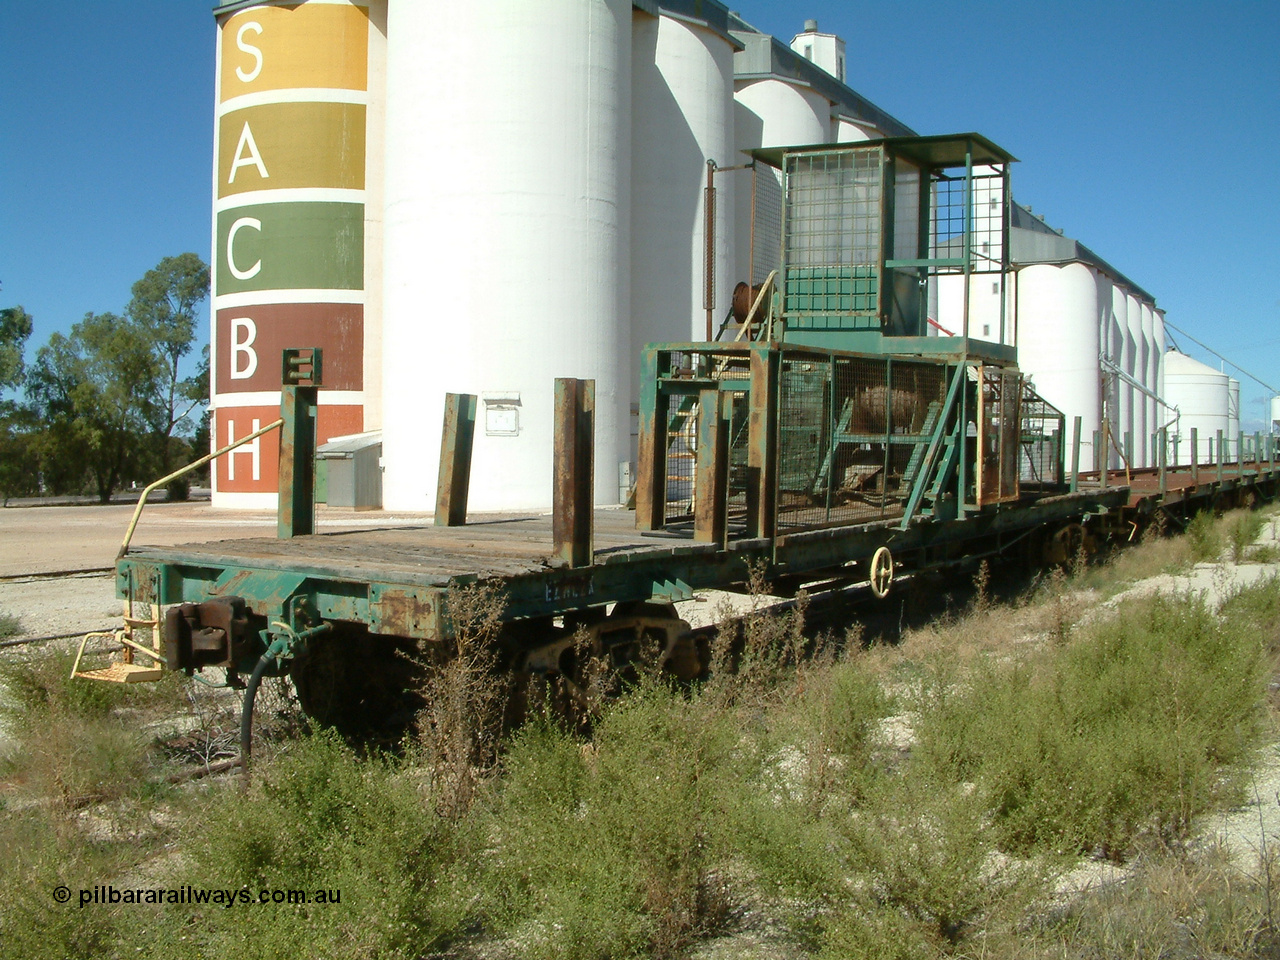 030411 110216
Kimba, rail recovery winch waggon EZWL 2, built using underframe of broad gauge horse box BH 4331. To Eyre Peninsula 1992, recoded then from AZWL. Scrapped in 2005.
Keywords: EZWL-type;EZWL2;SAR-Islington-WS;BH-type;BH4331;